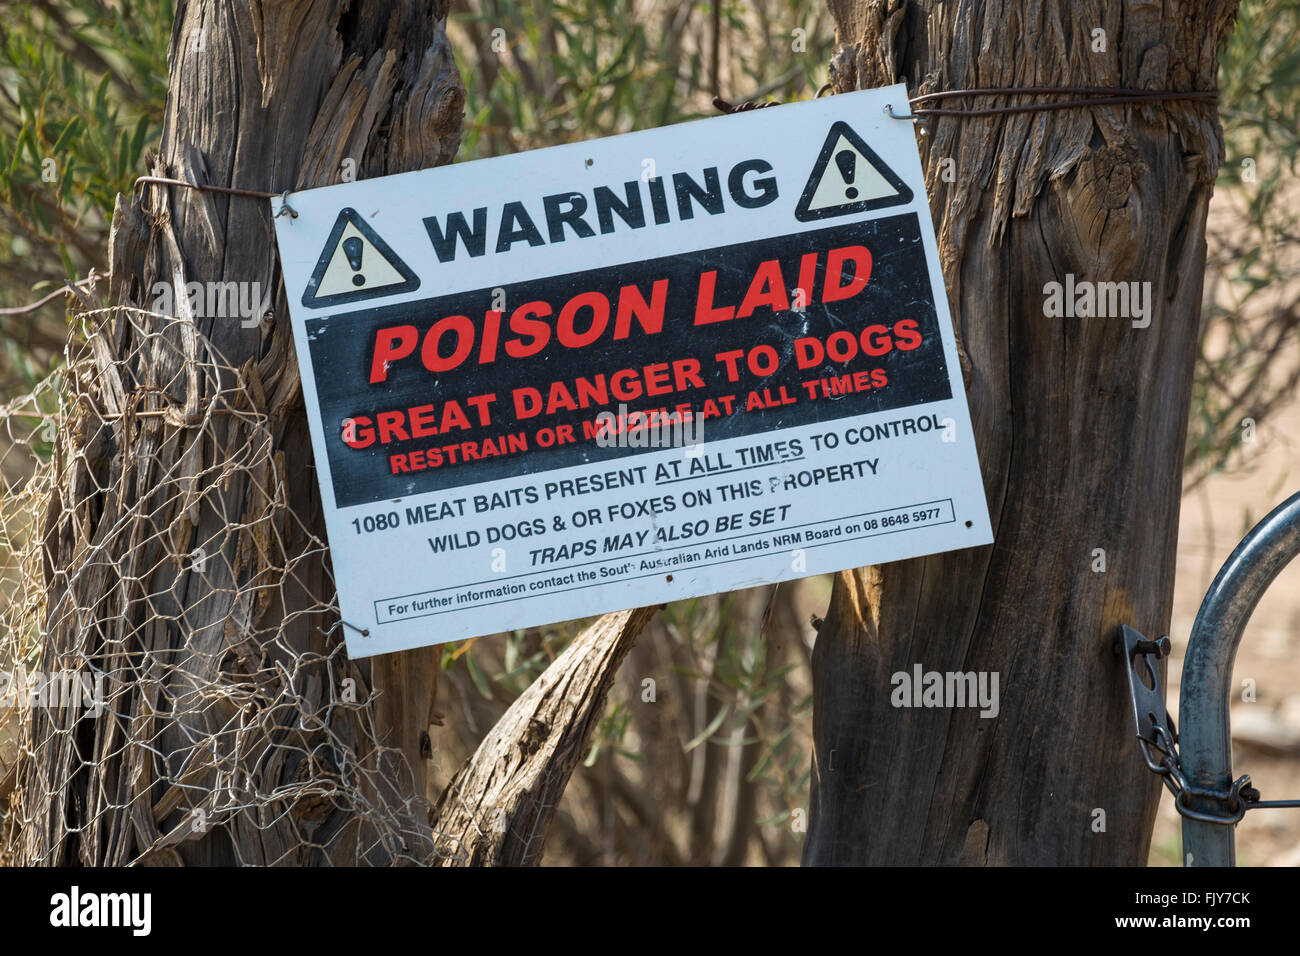 Poison bait for wild dogs and foxes warning sign in the Flinders Ranges in South Australia Stock Photo